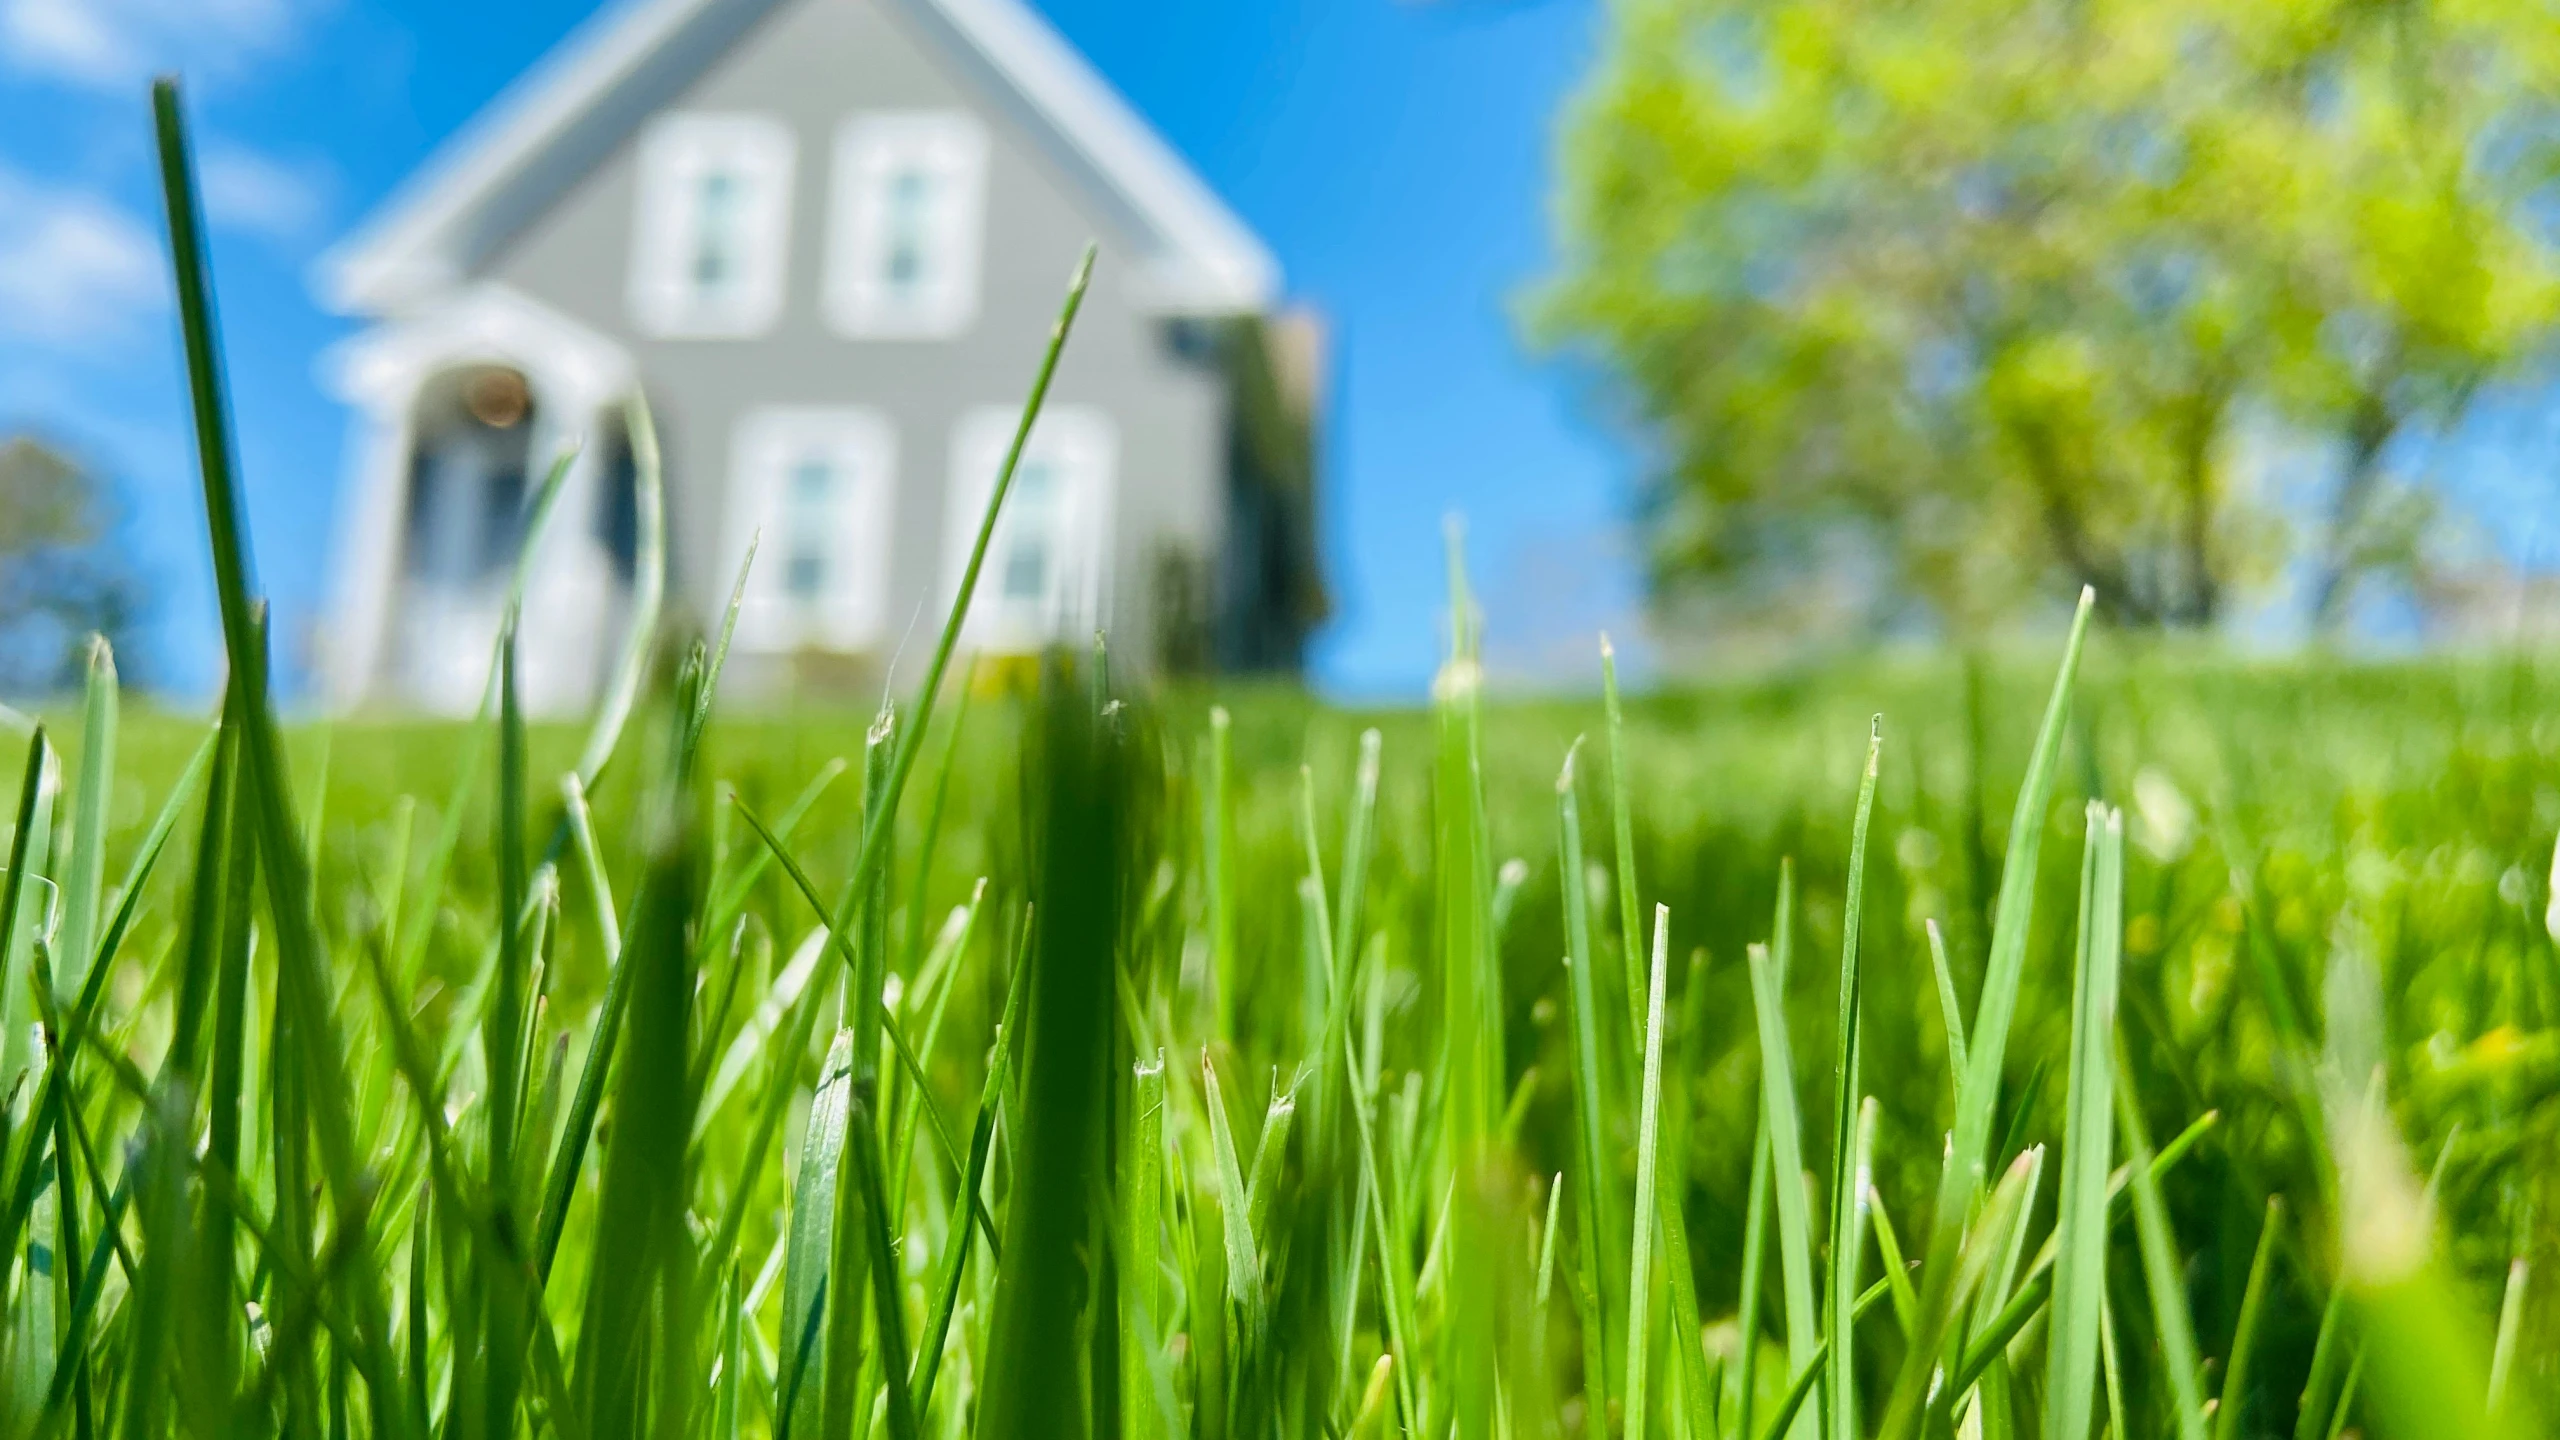 house in the background seen through green grass